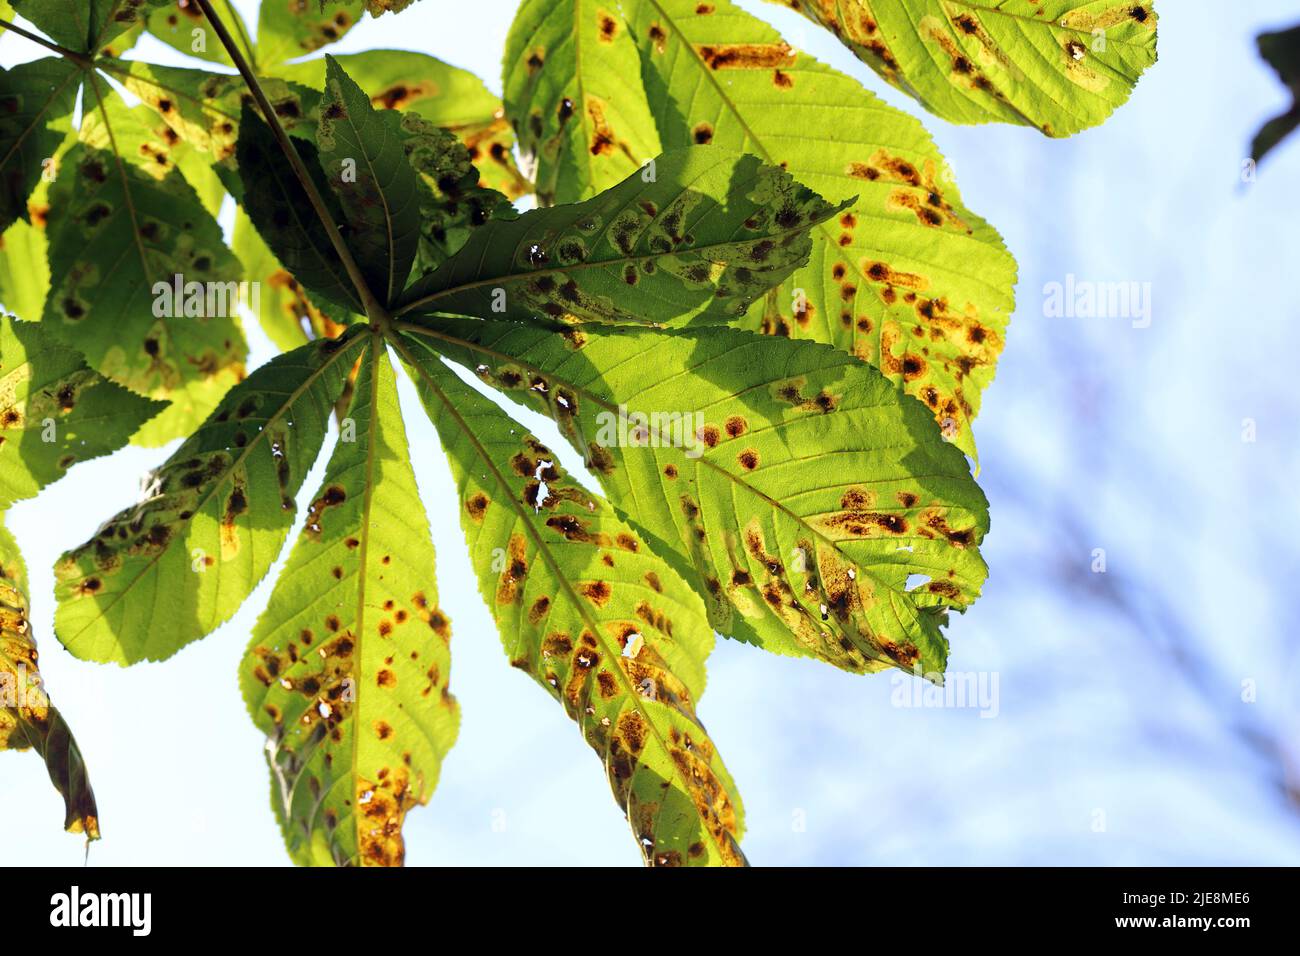 Common horse-chestnut (Aesculus hippocastanum) leaves damaged by horse-chestnut leaf miner (Cameraria ohridella) is a leaf-mining moth. Stock Photo